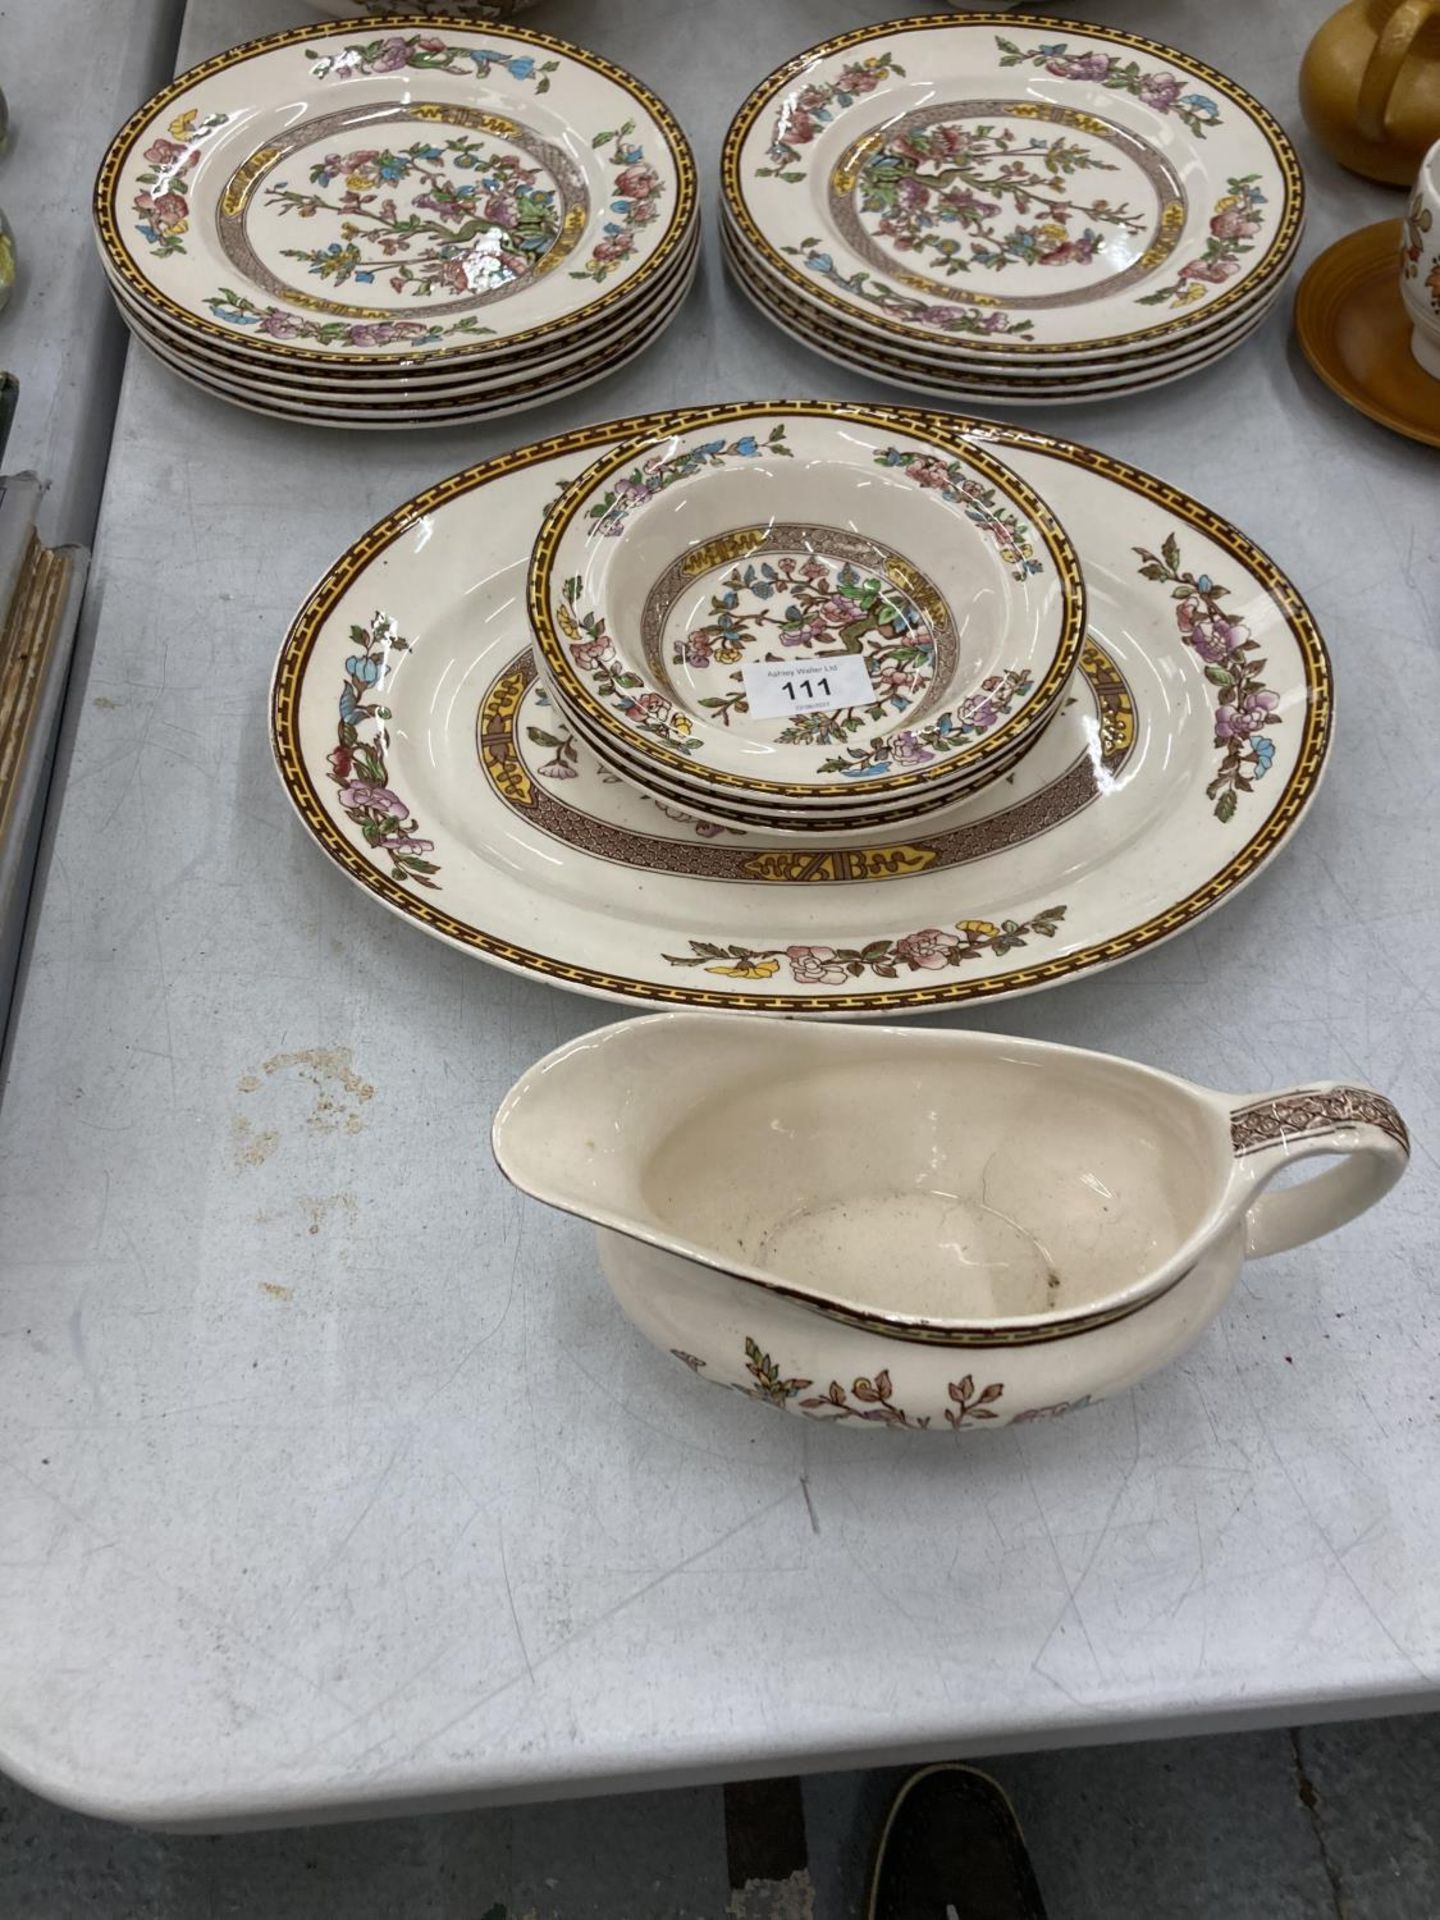 A QUANTITY OF WASHINGTON 'INDIAN TREE' DINNERWARE TO INCLUDE PLATES, BOWLS, TUREEN, SAUCE BOAT, ETC - Image 4 of 6